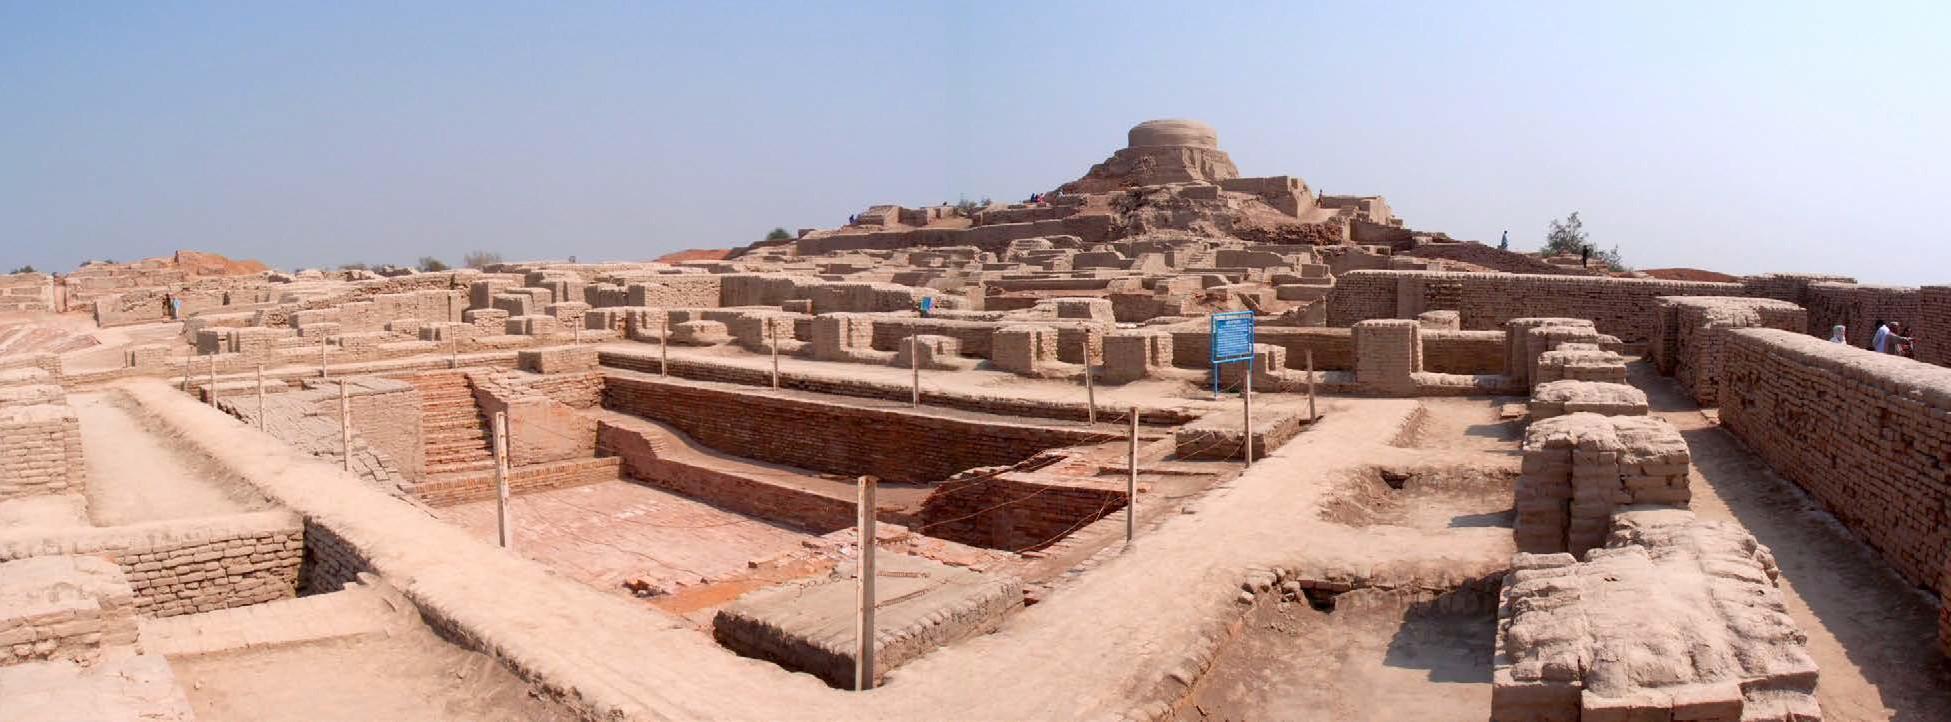 Panoramic view of the stupa mound and great bath in Mohenjo-Daro